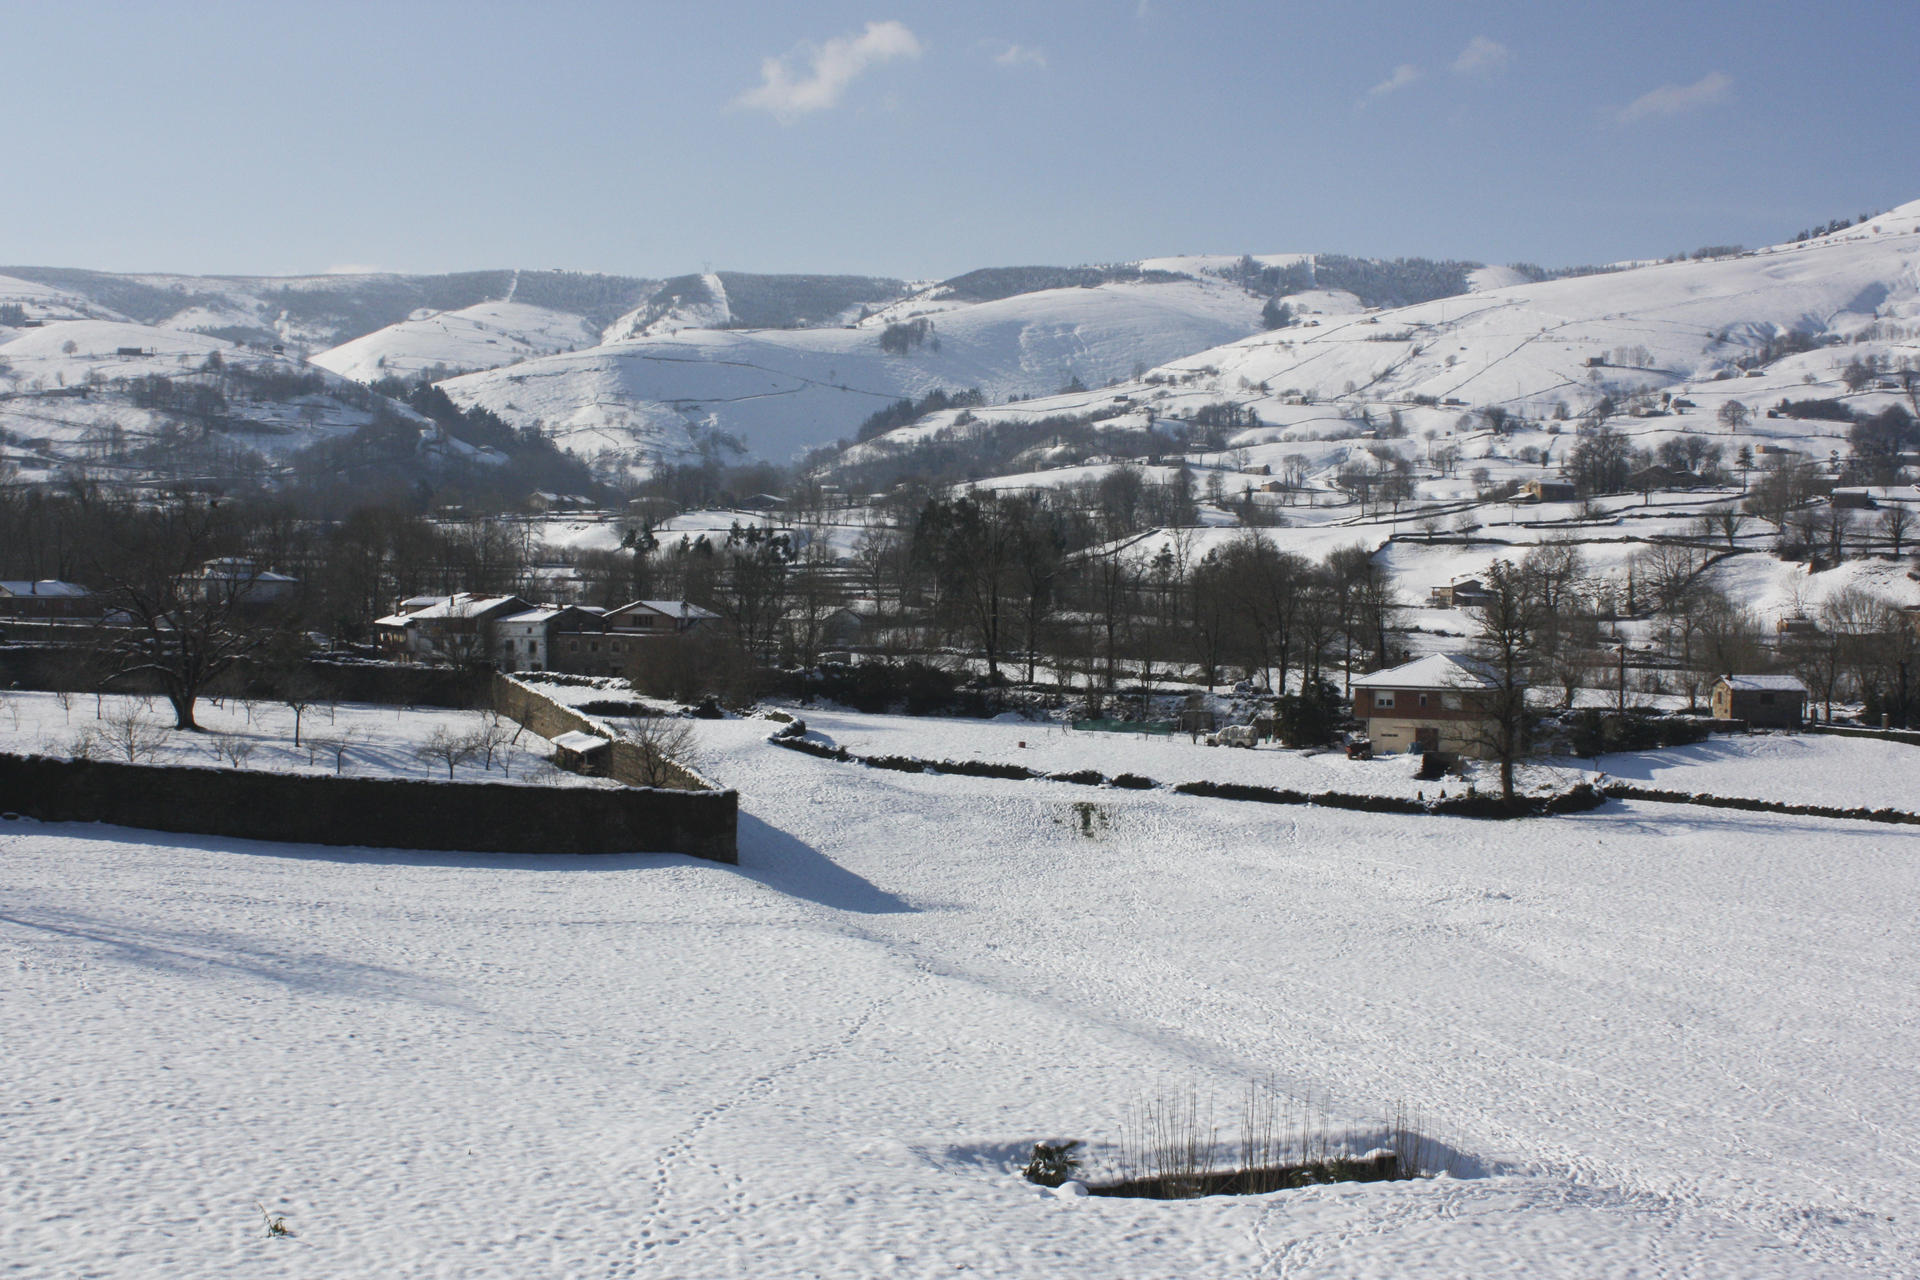 The view from the Coopers' house in Selaya, northern Spain, in winter. Photos: Matthew Cooper